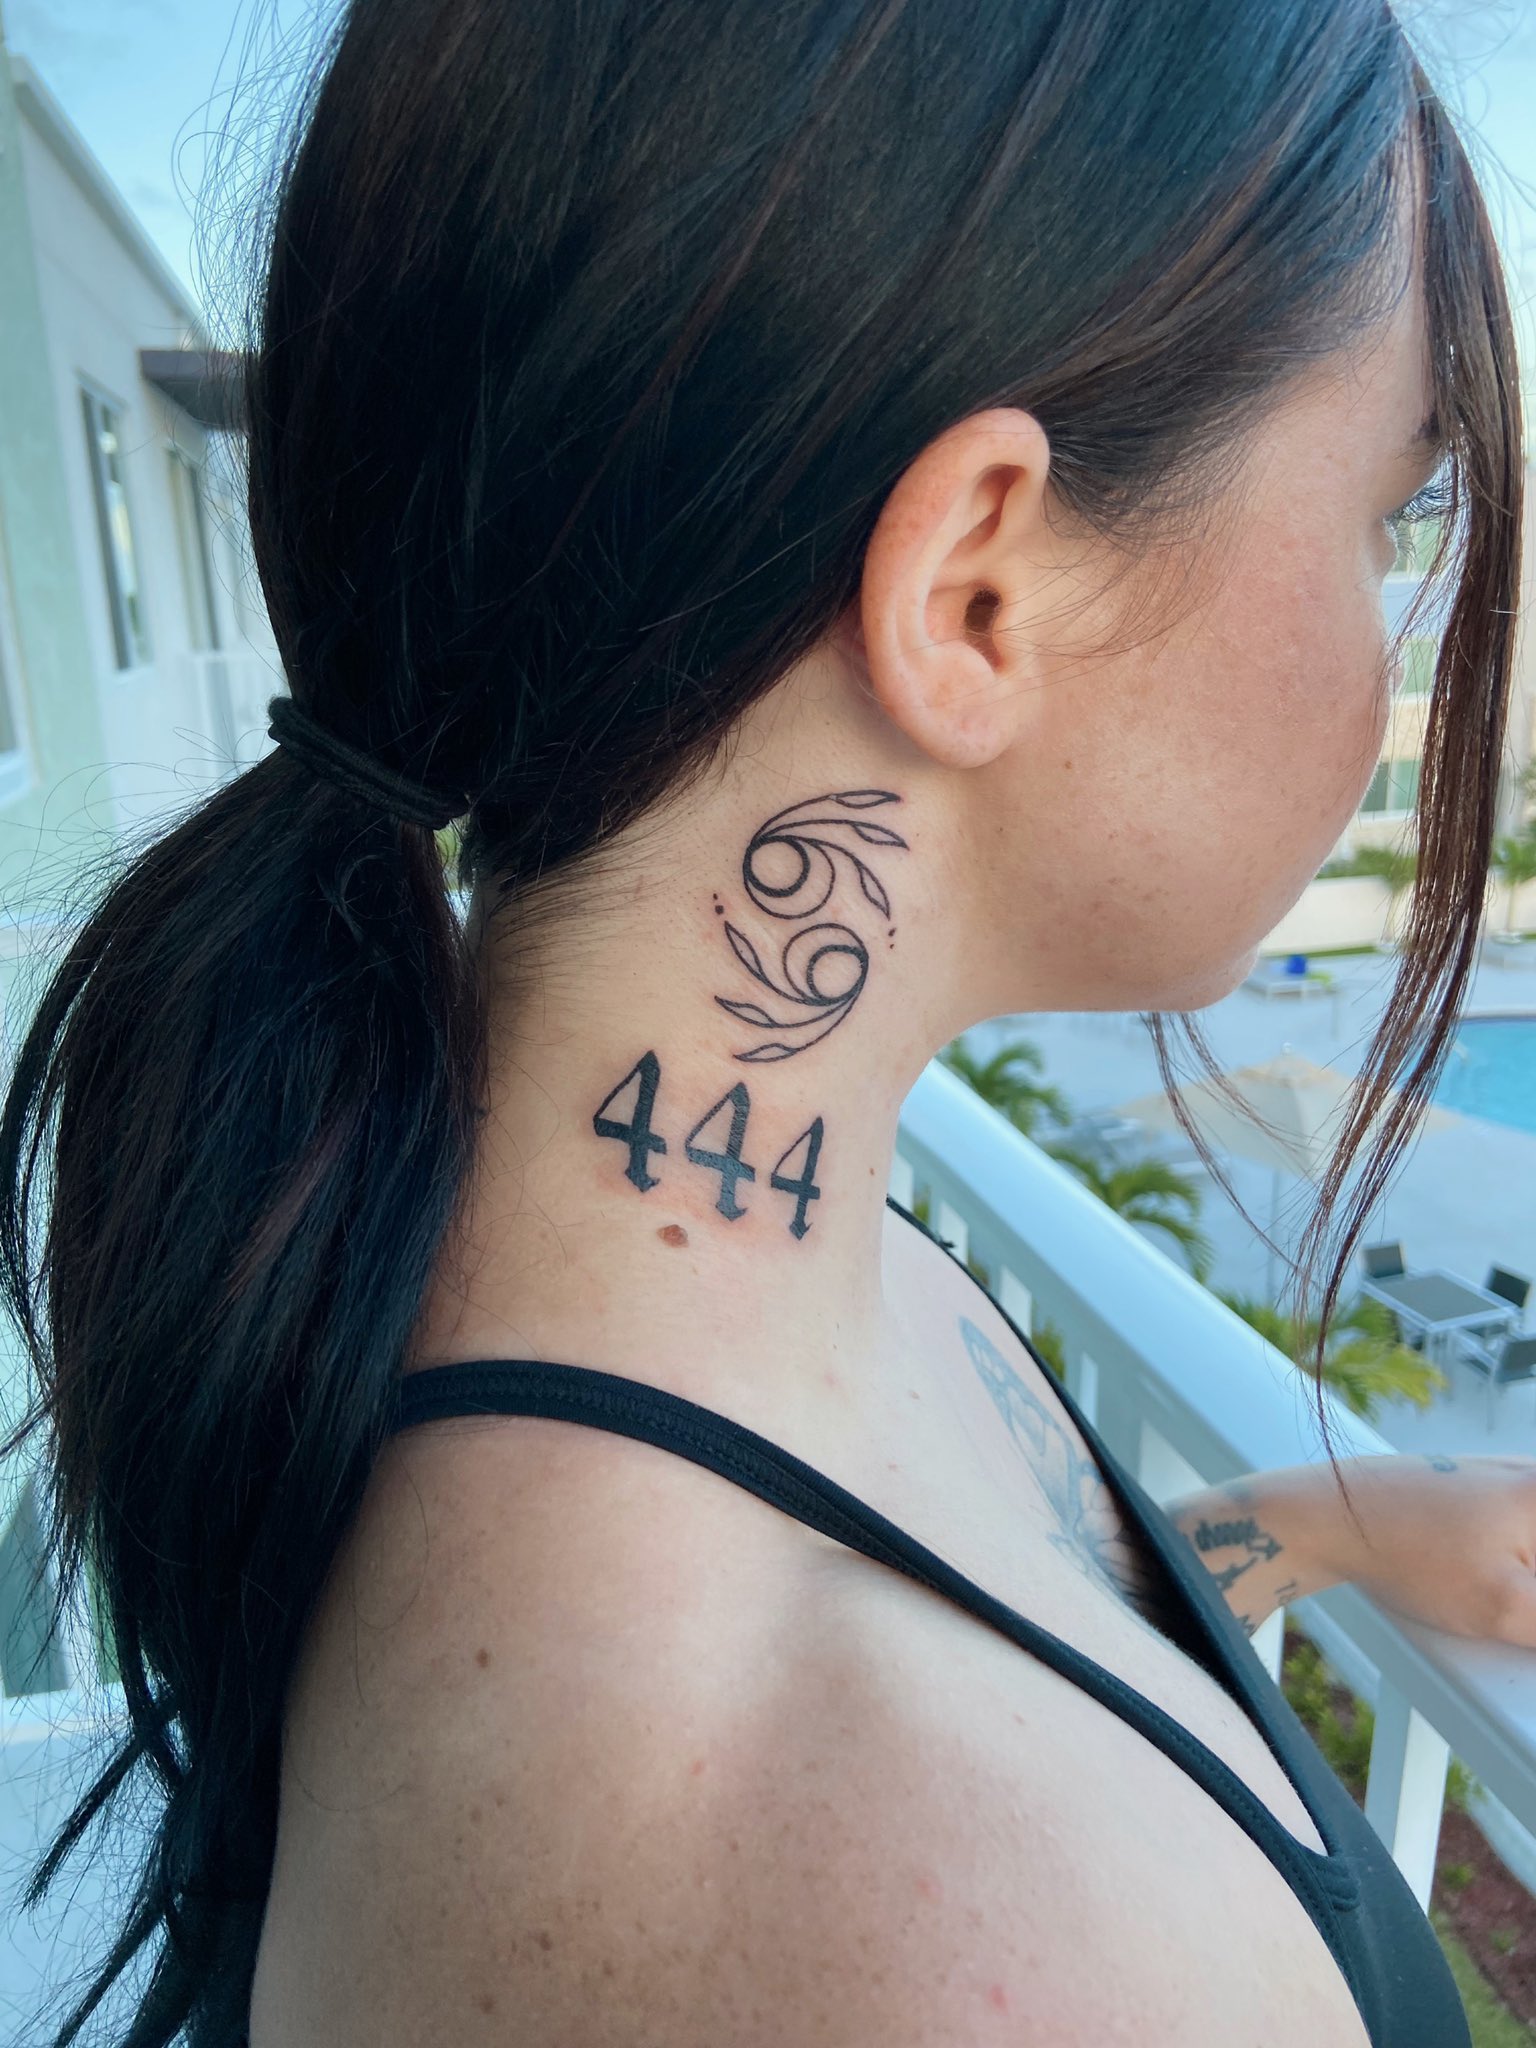 Sixty Eight-68 Number Tattoo Designs - Page 4 of 4 - Tattoos with Names